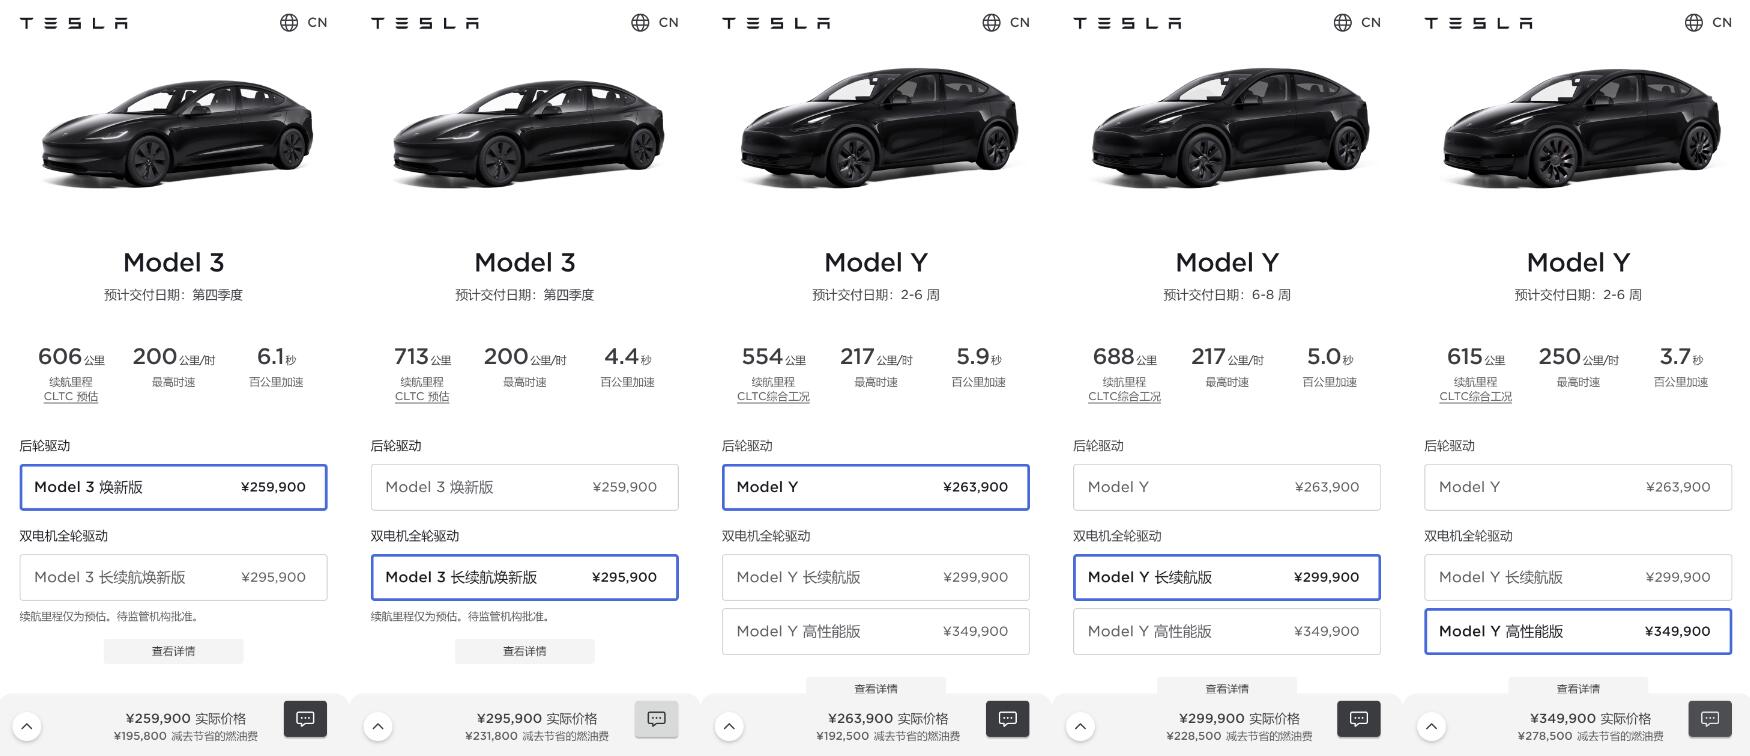 Tesla Unveils Enhanced Model Y in China: Base Model Gets Performance and Range Upgrades, Price Remains Unchanged - Car News - 2